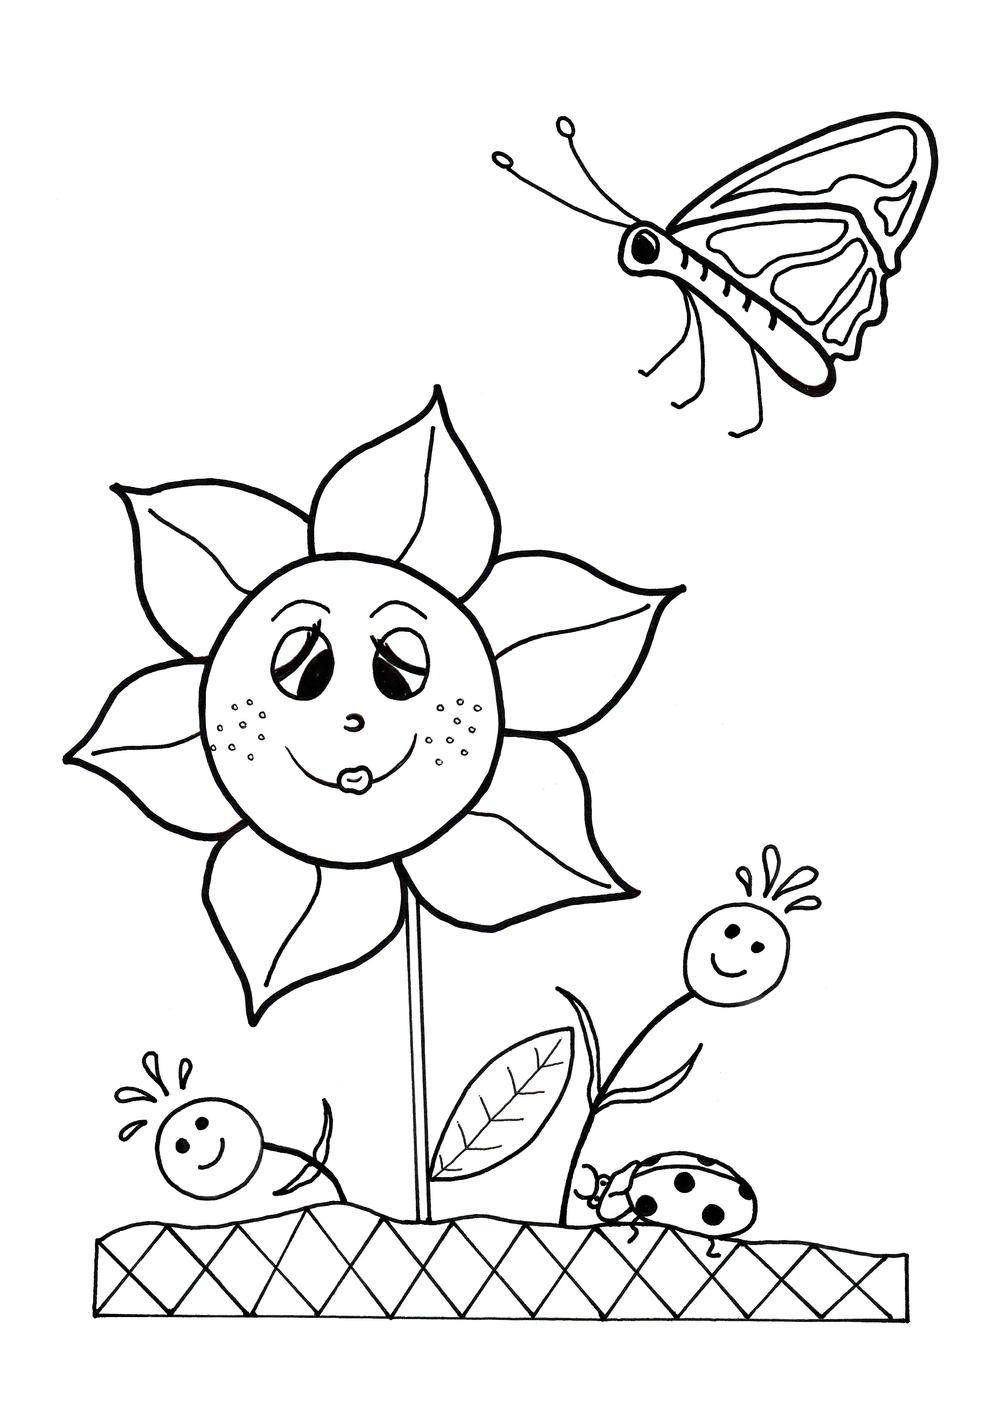 Coloring Pages Of Flowers For Kids
 Dancing Flowers Spring Coloring Sheet